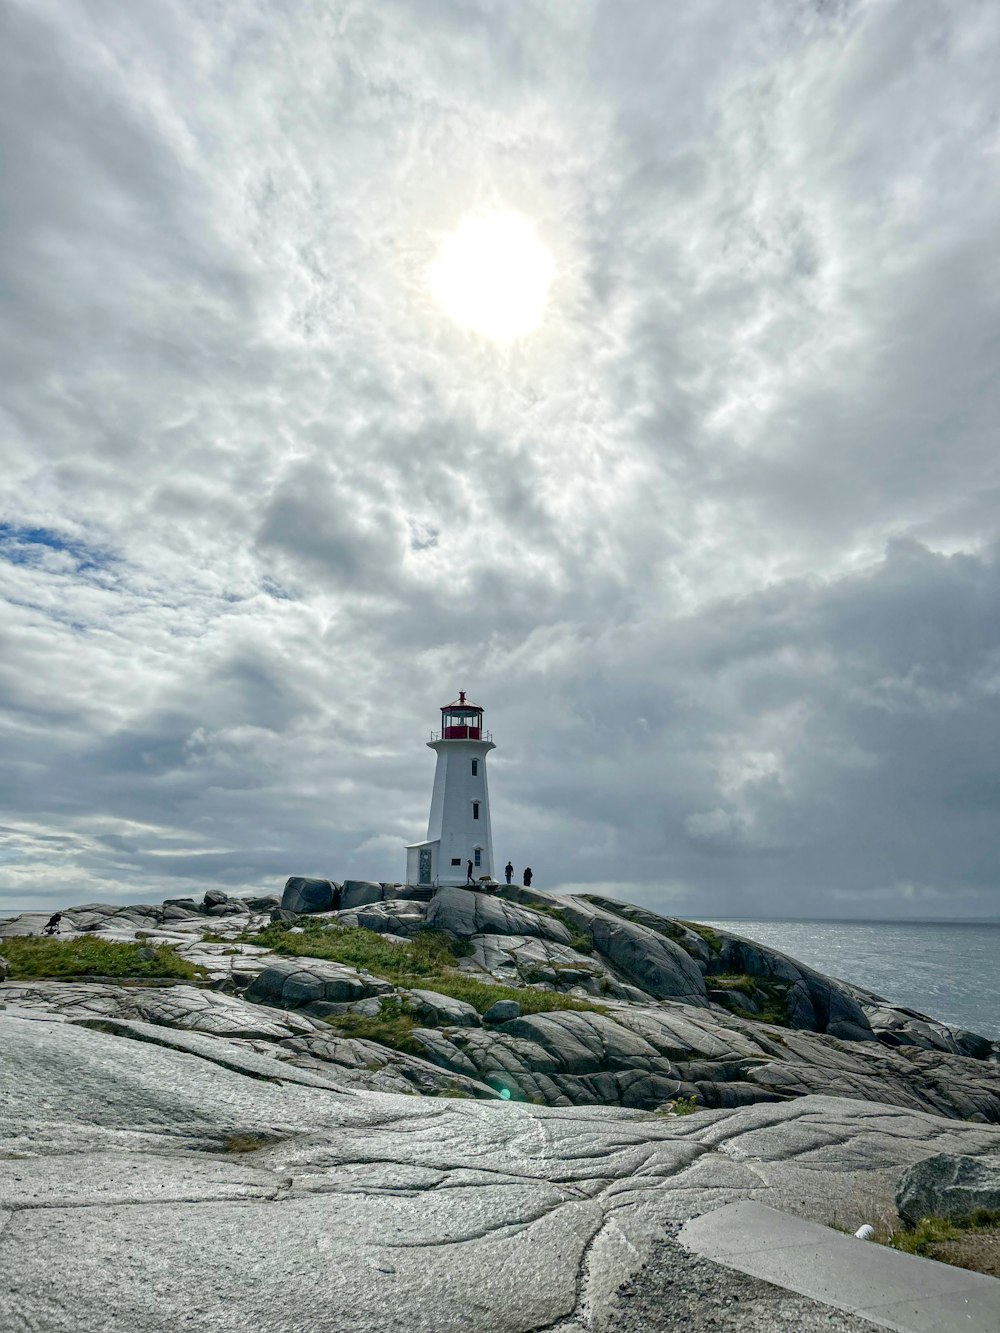 a light house sitting on top of a rocky island